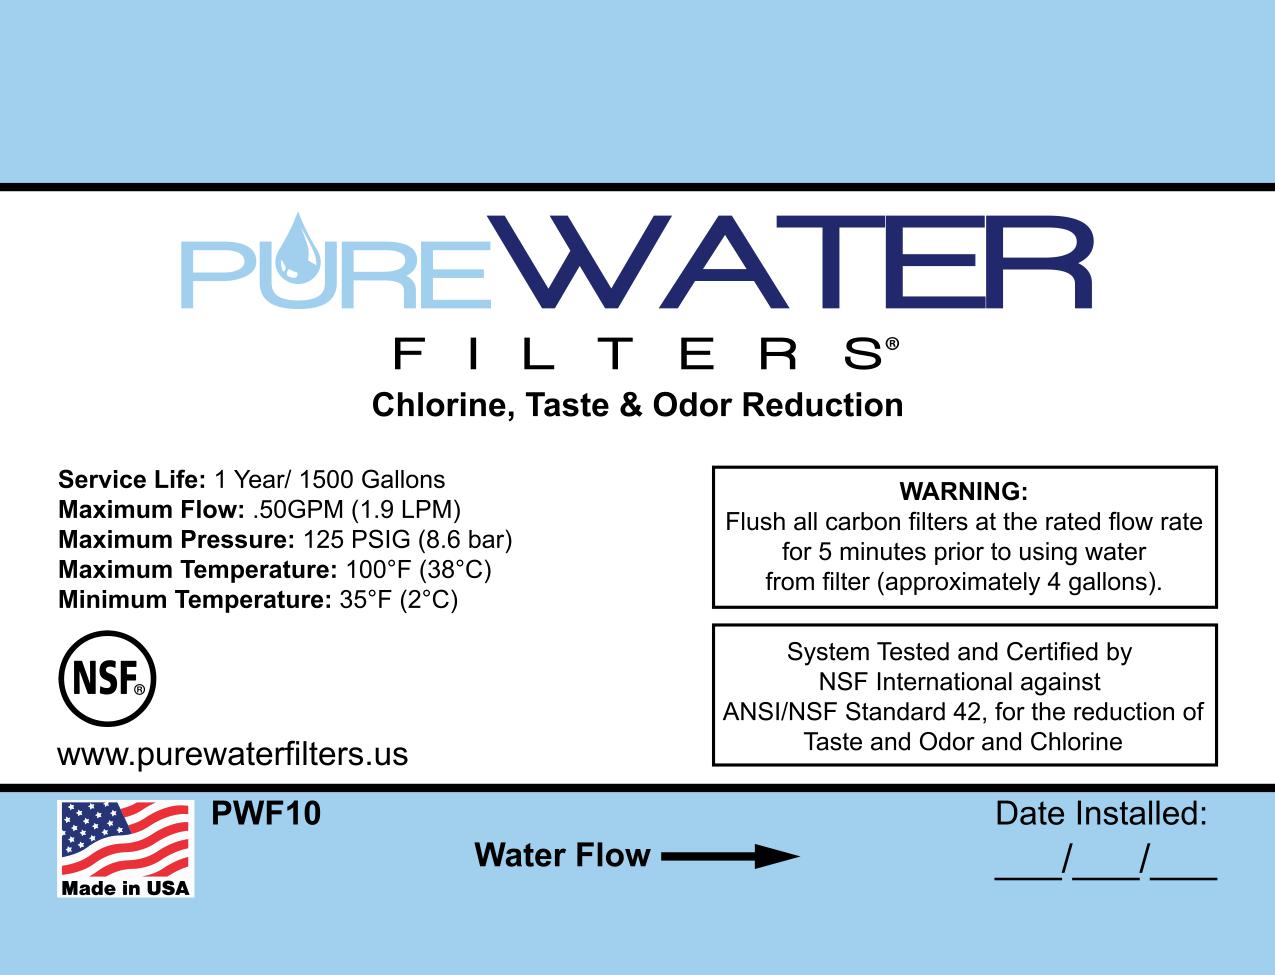 PureWater Filters Inline Filter Replacement For Refrigerators, Ice Makers, Coffee Makers, Water Fountains, Water Coolers, and More - image 4 of 8